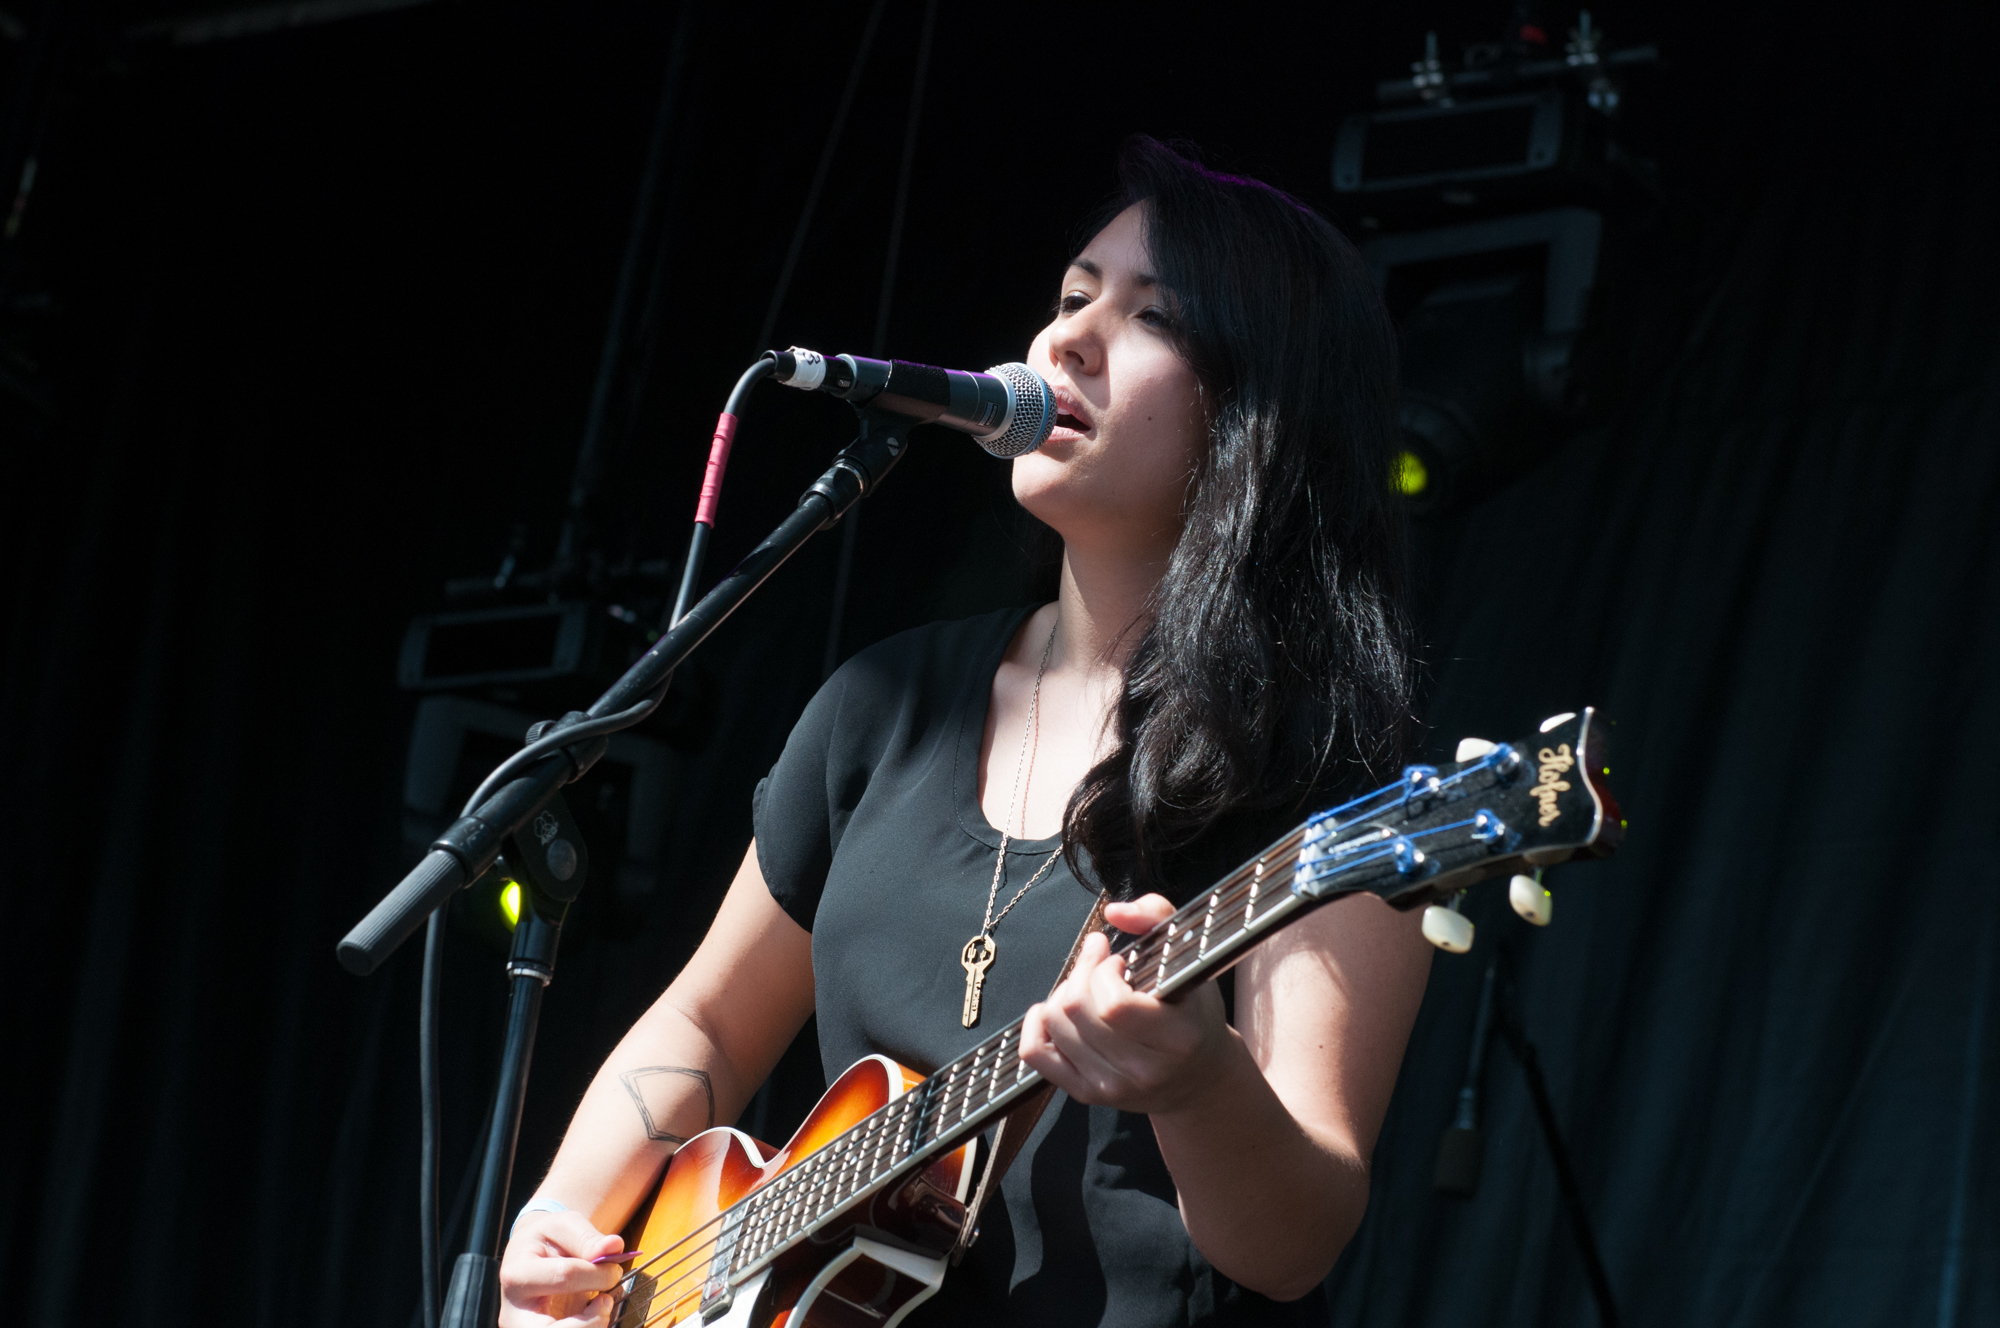 La Luz did a fantastic set filled with surfer rock and a plethora of dancing in the crowd. Photo by Morgen Schuler